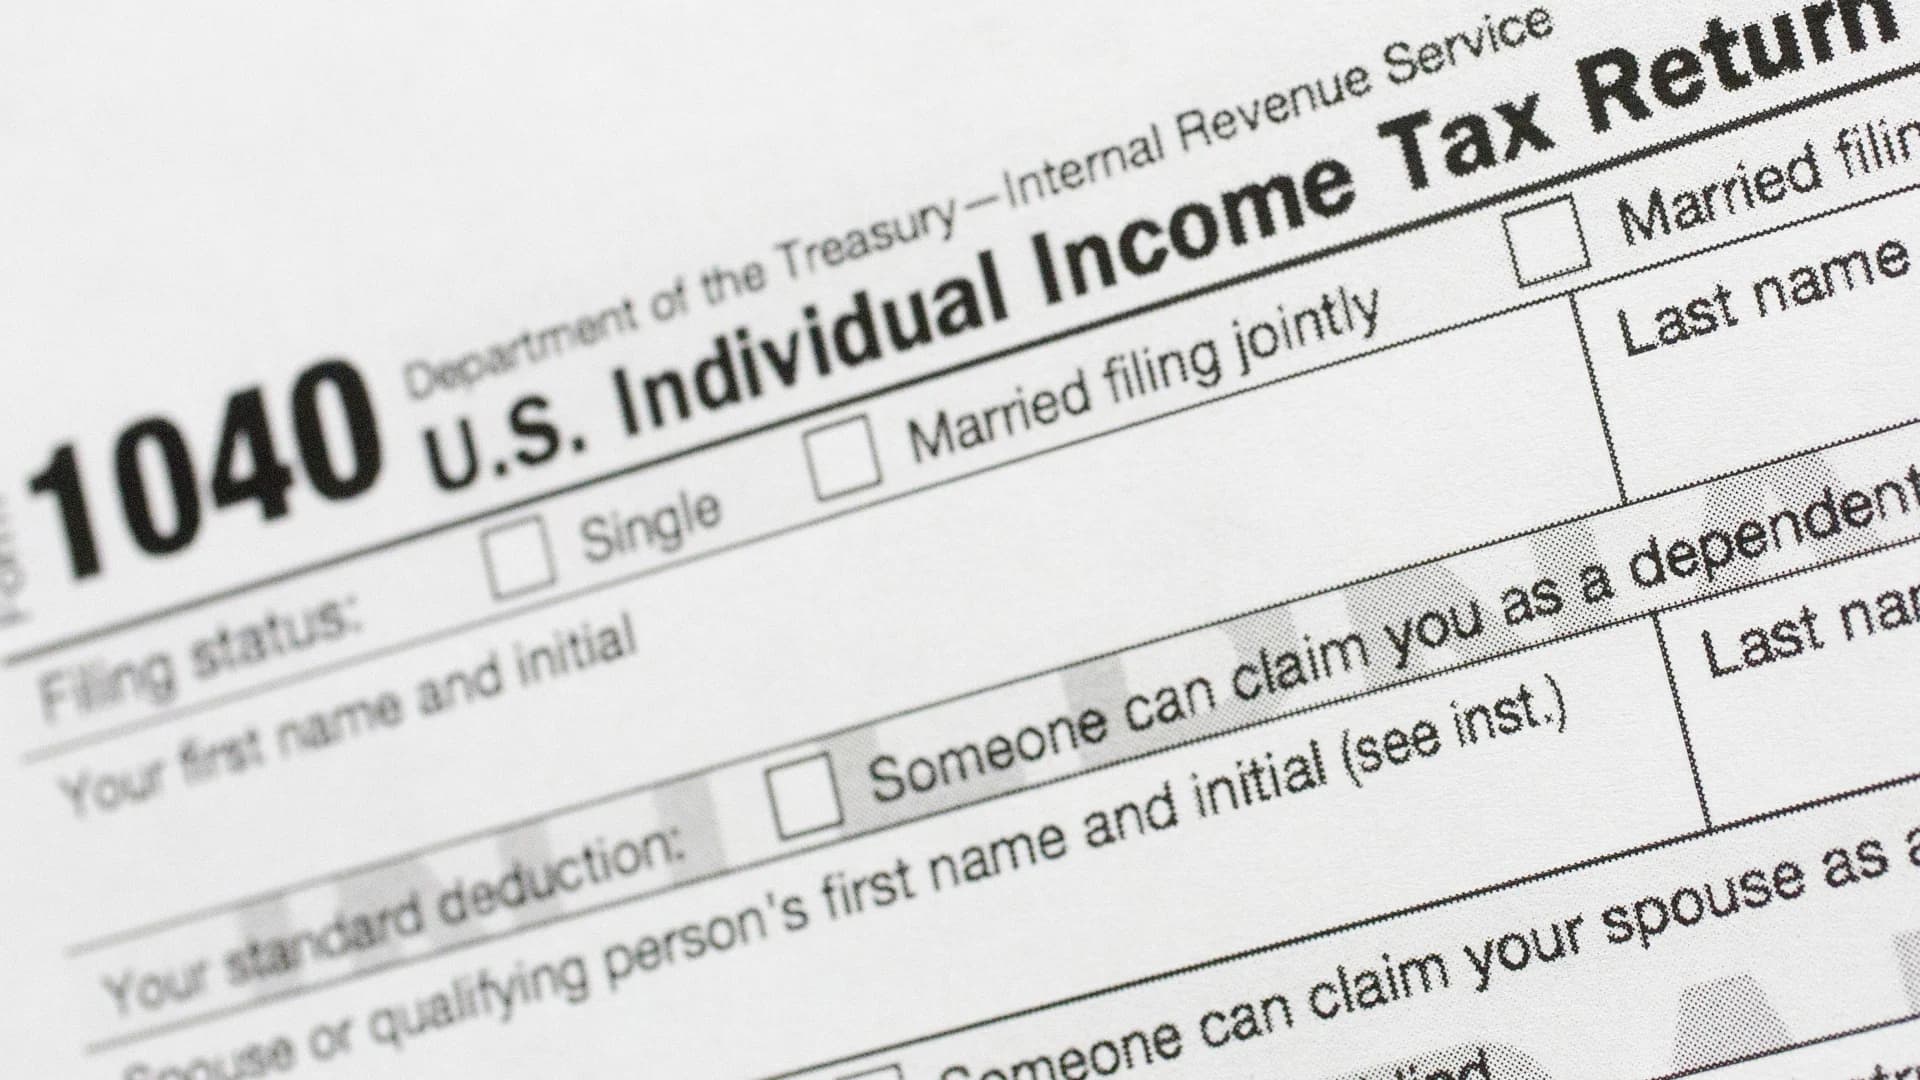 9 tips to help you file your federal income taxes